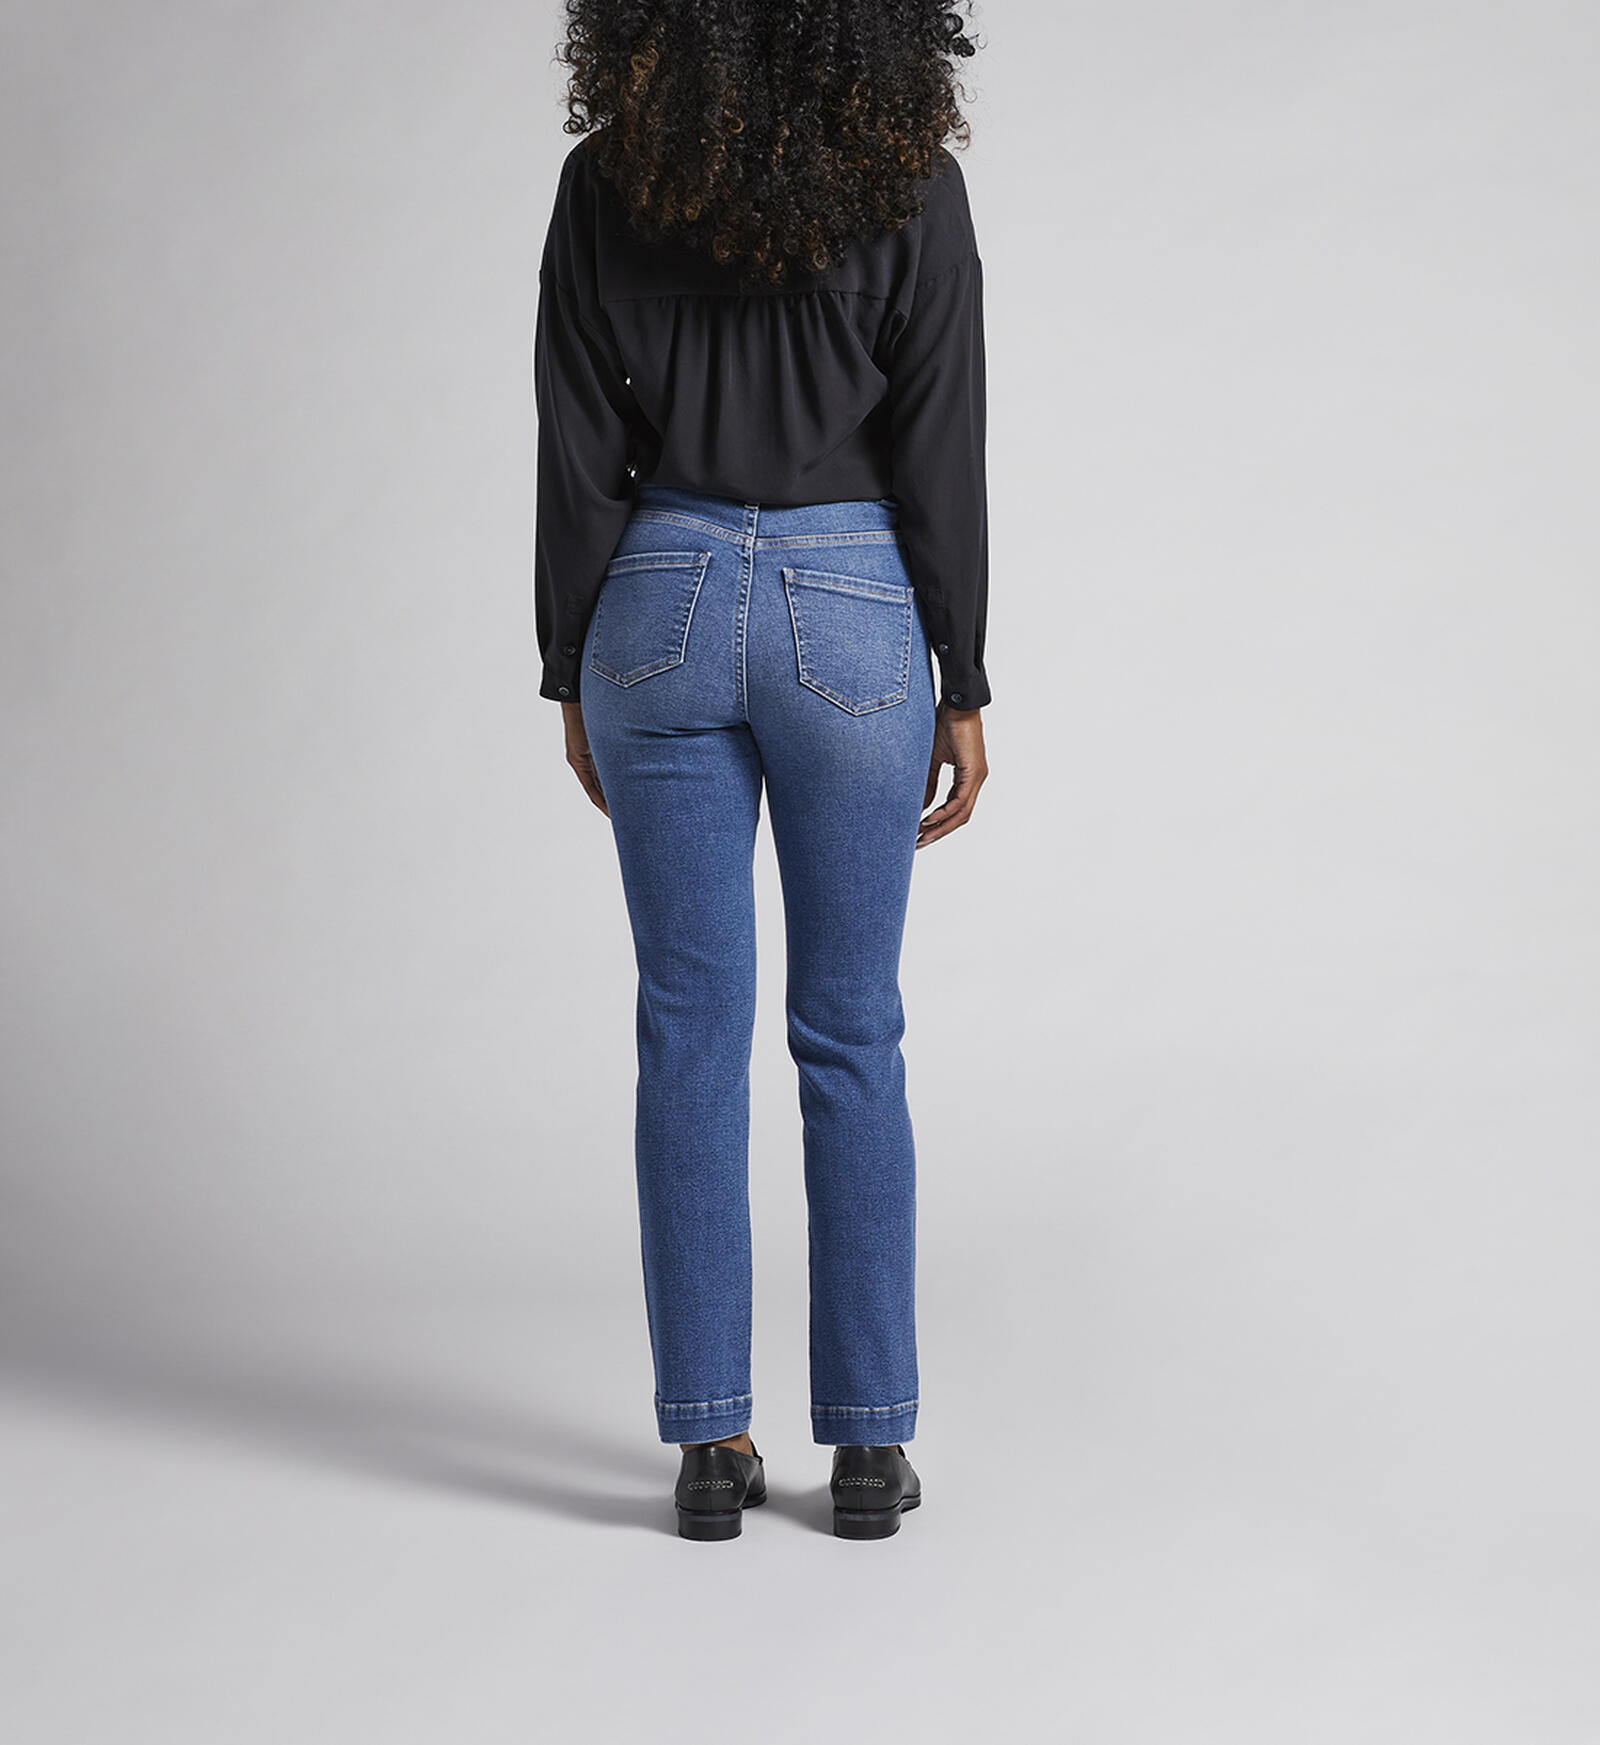 Buy SAVAGE PASSION HIGH-RISE STRAIGHT FIT JEANS for Women Online